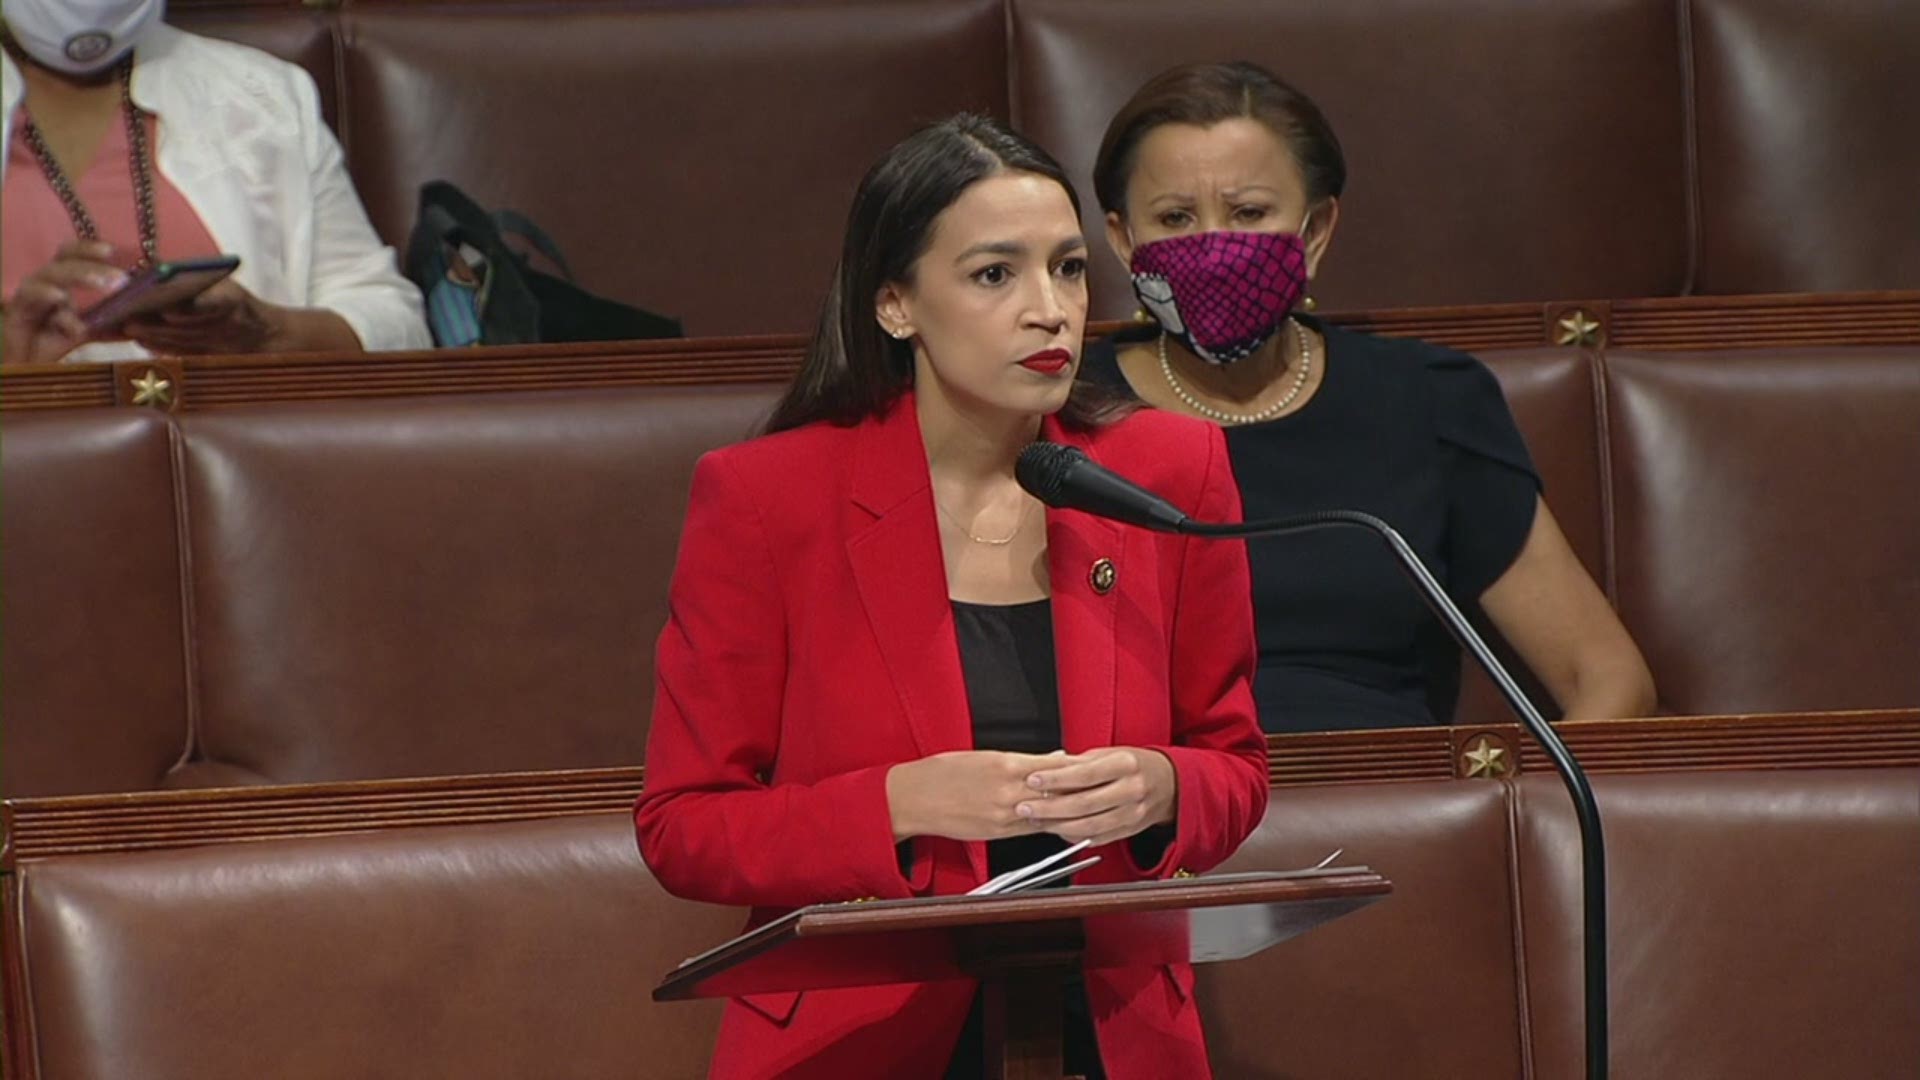 Rep. Alexandria Ocasio-Cortez took to the House floor Thursday to condone Florida GOP Rep. Ted Yoho, who allegedly confronted her on the House steps.